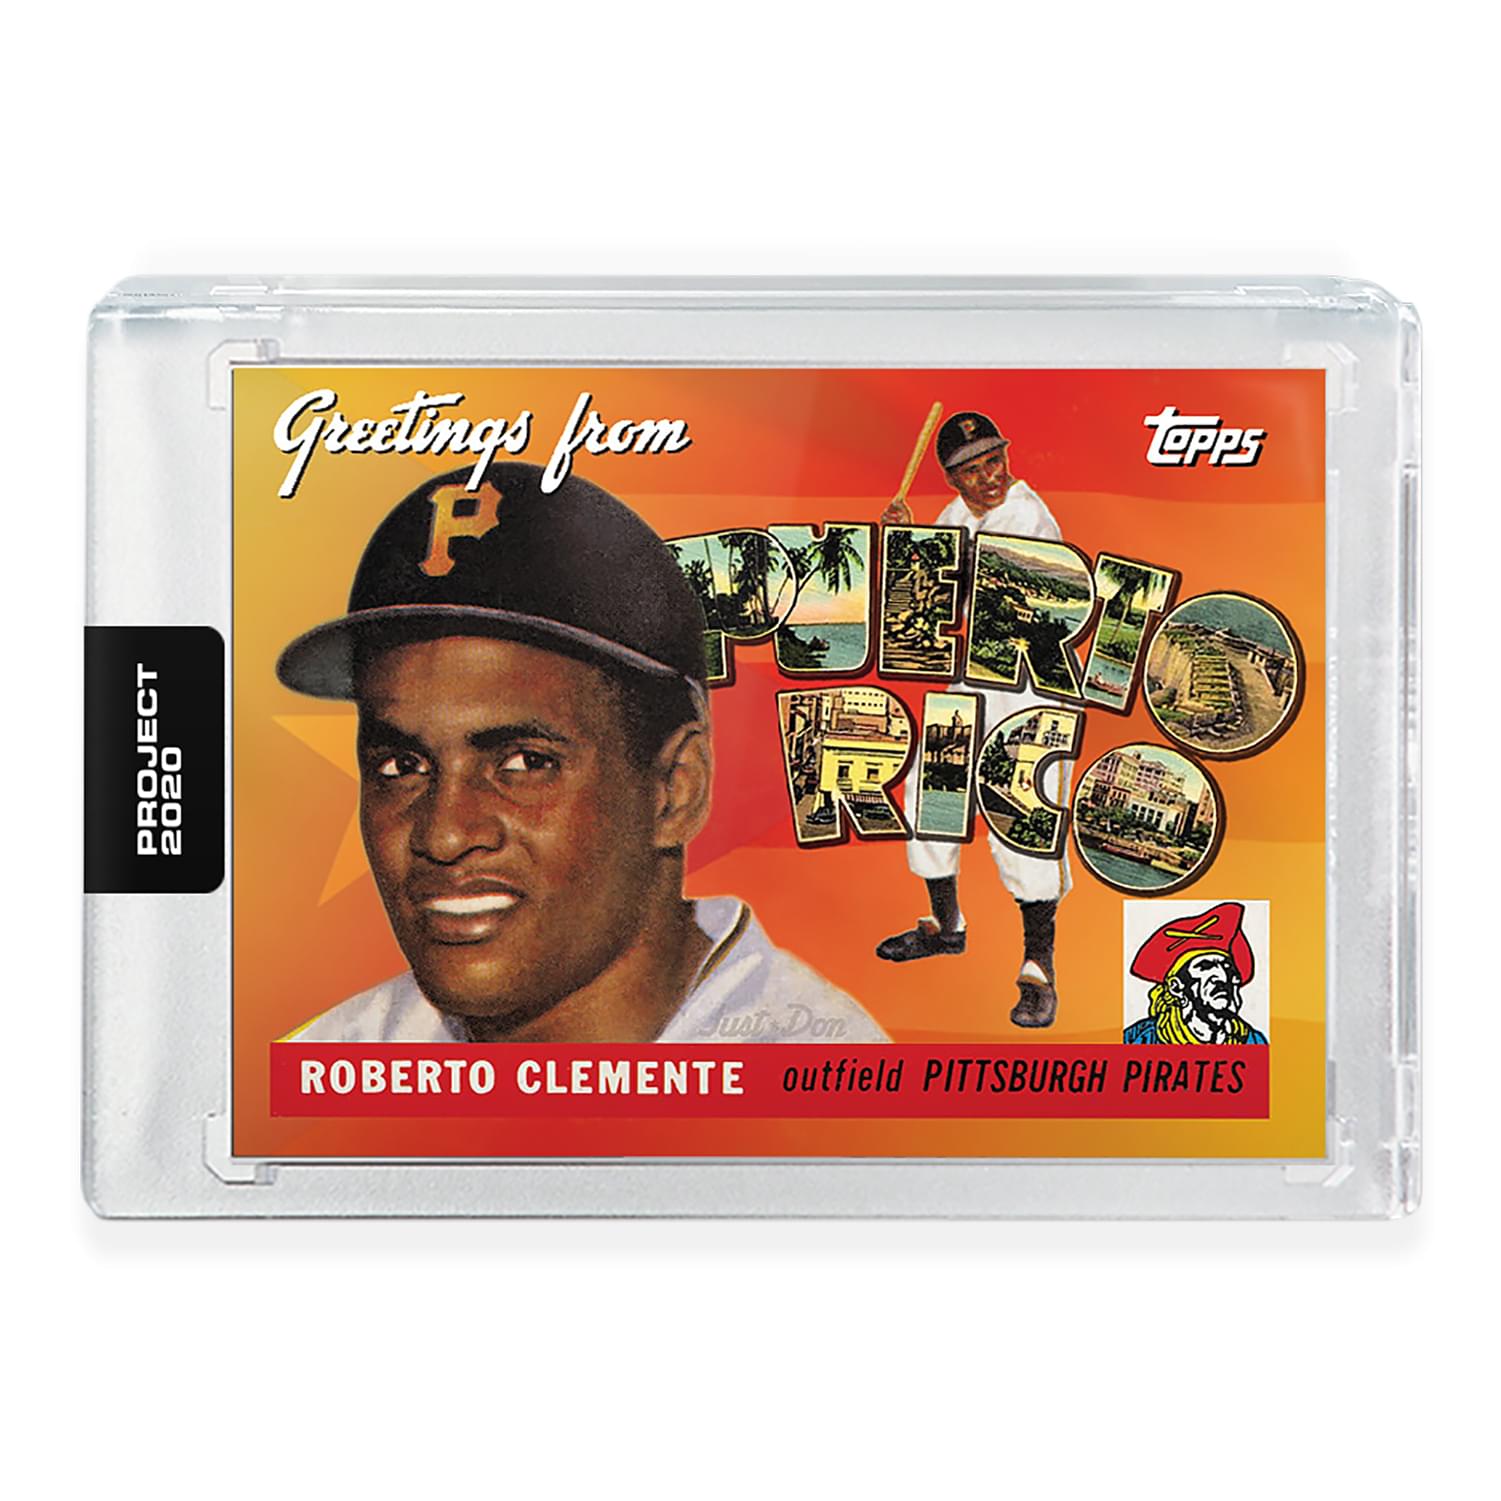 Topps PROJECT 2020 Card 341 - 1955 Roberto Clemente by Don C